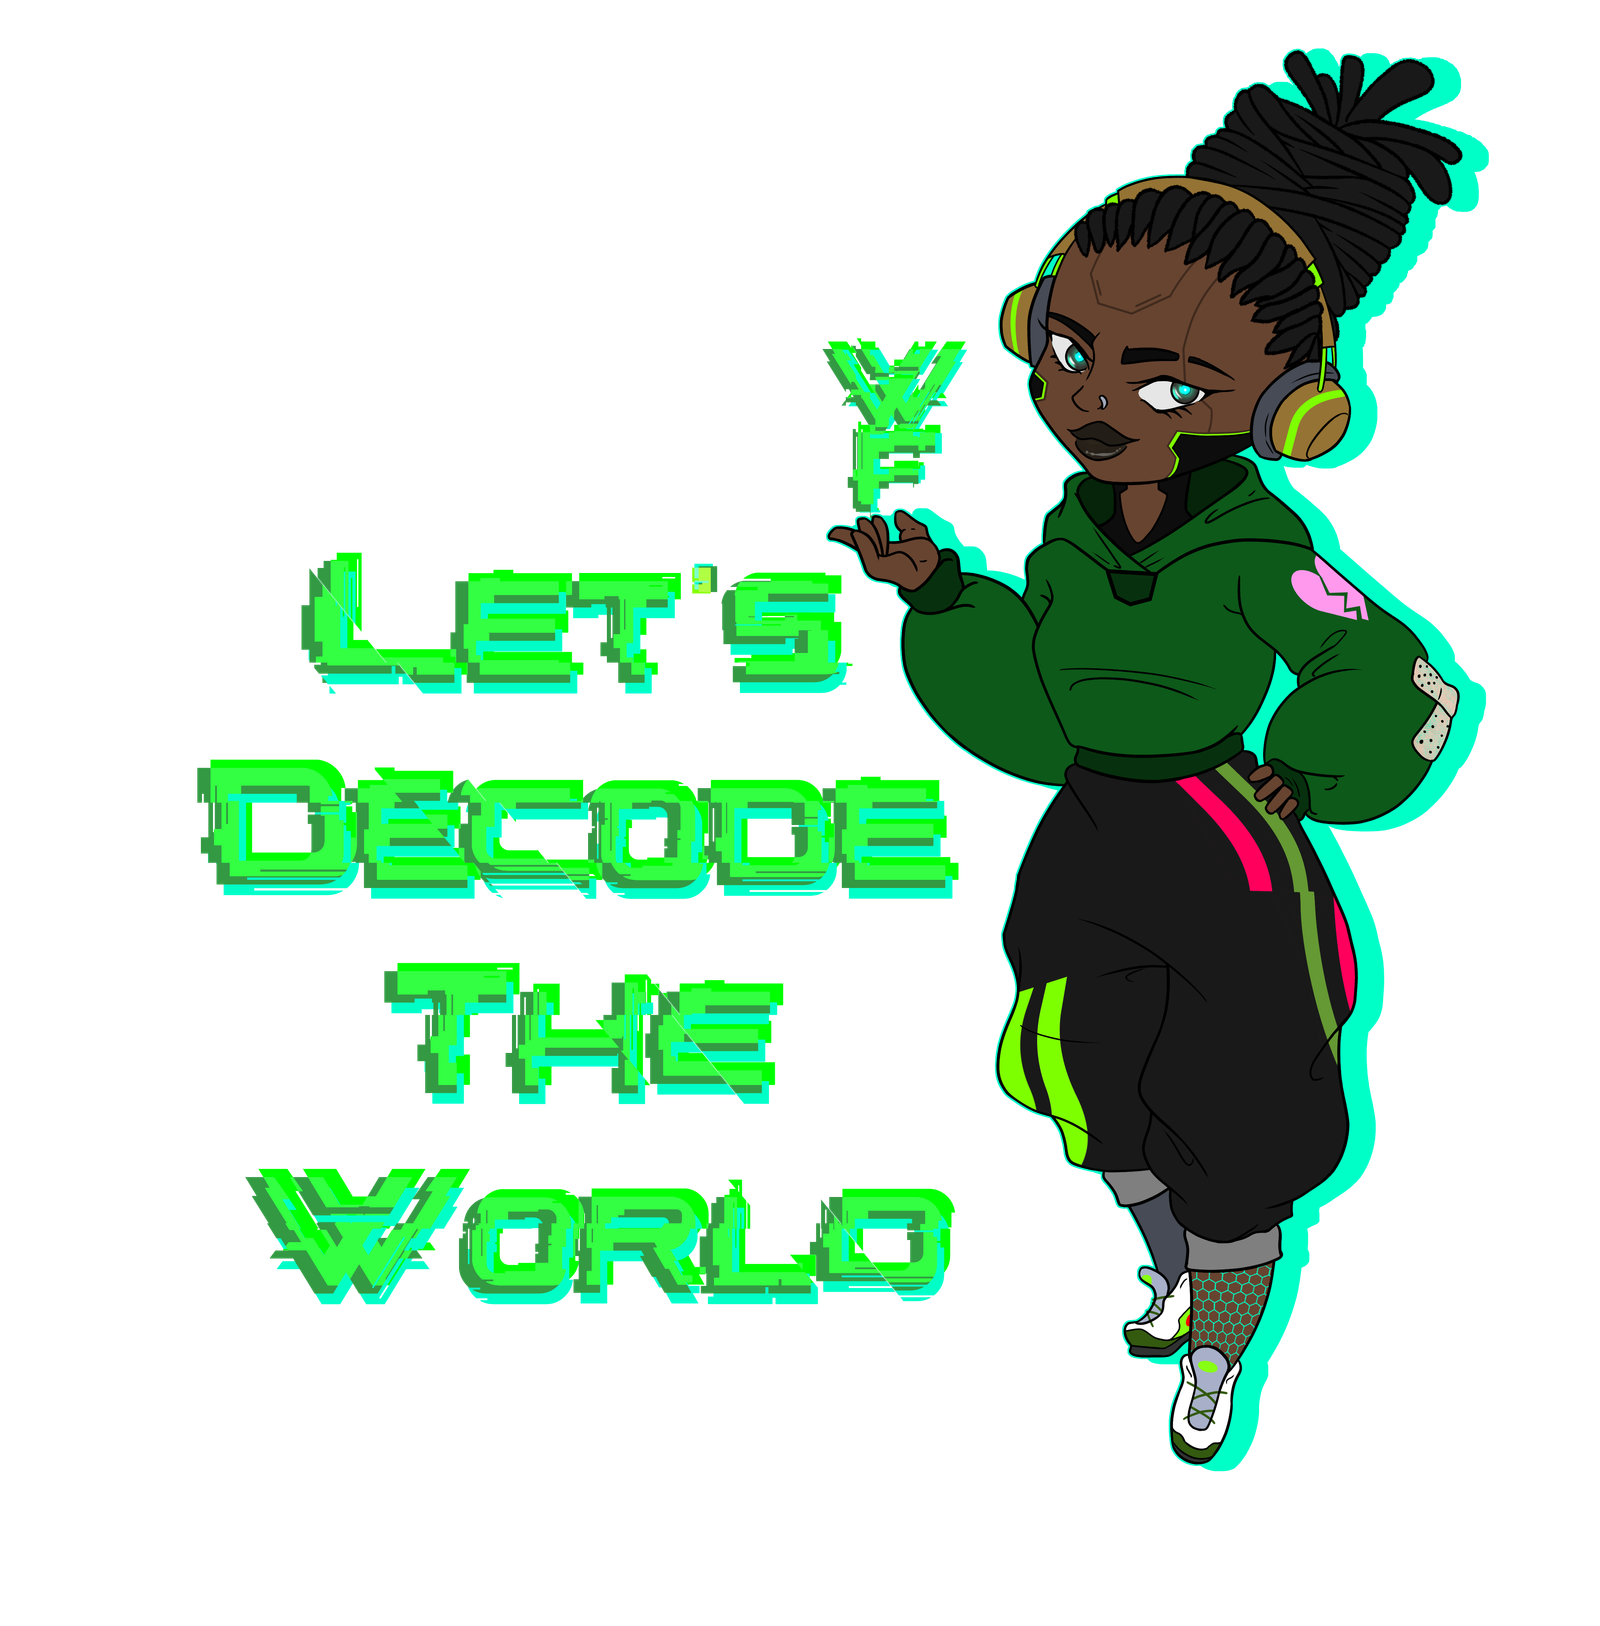 wired foundations girl avatar with Let's decode the world